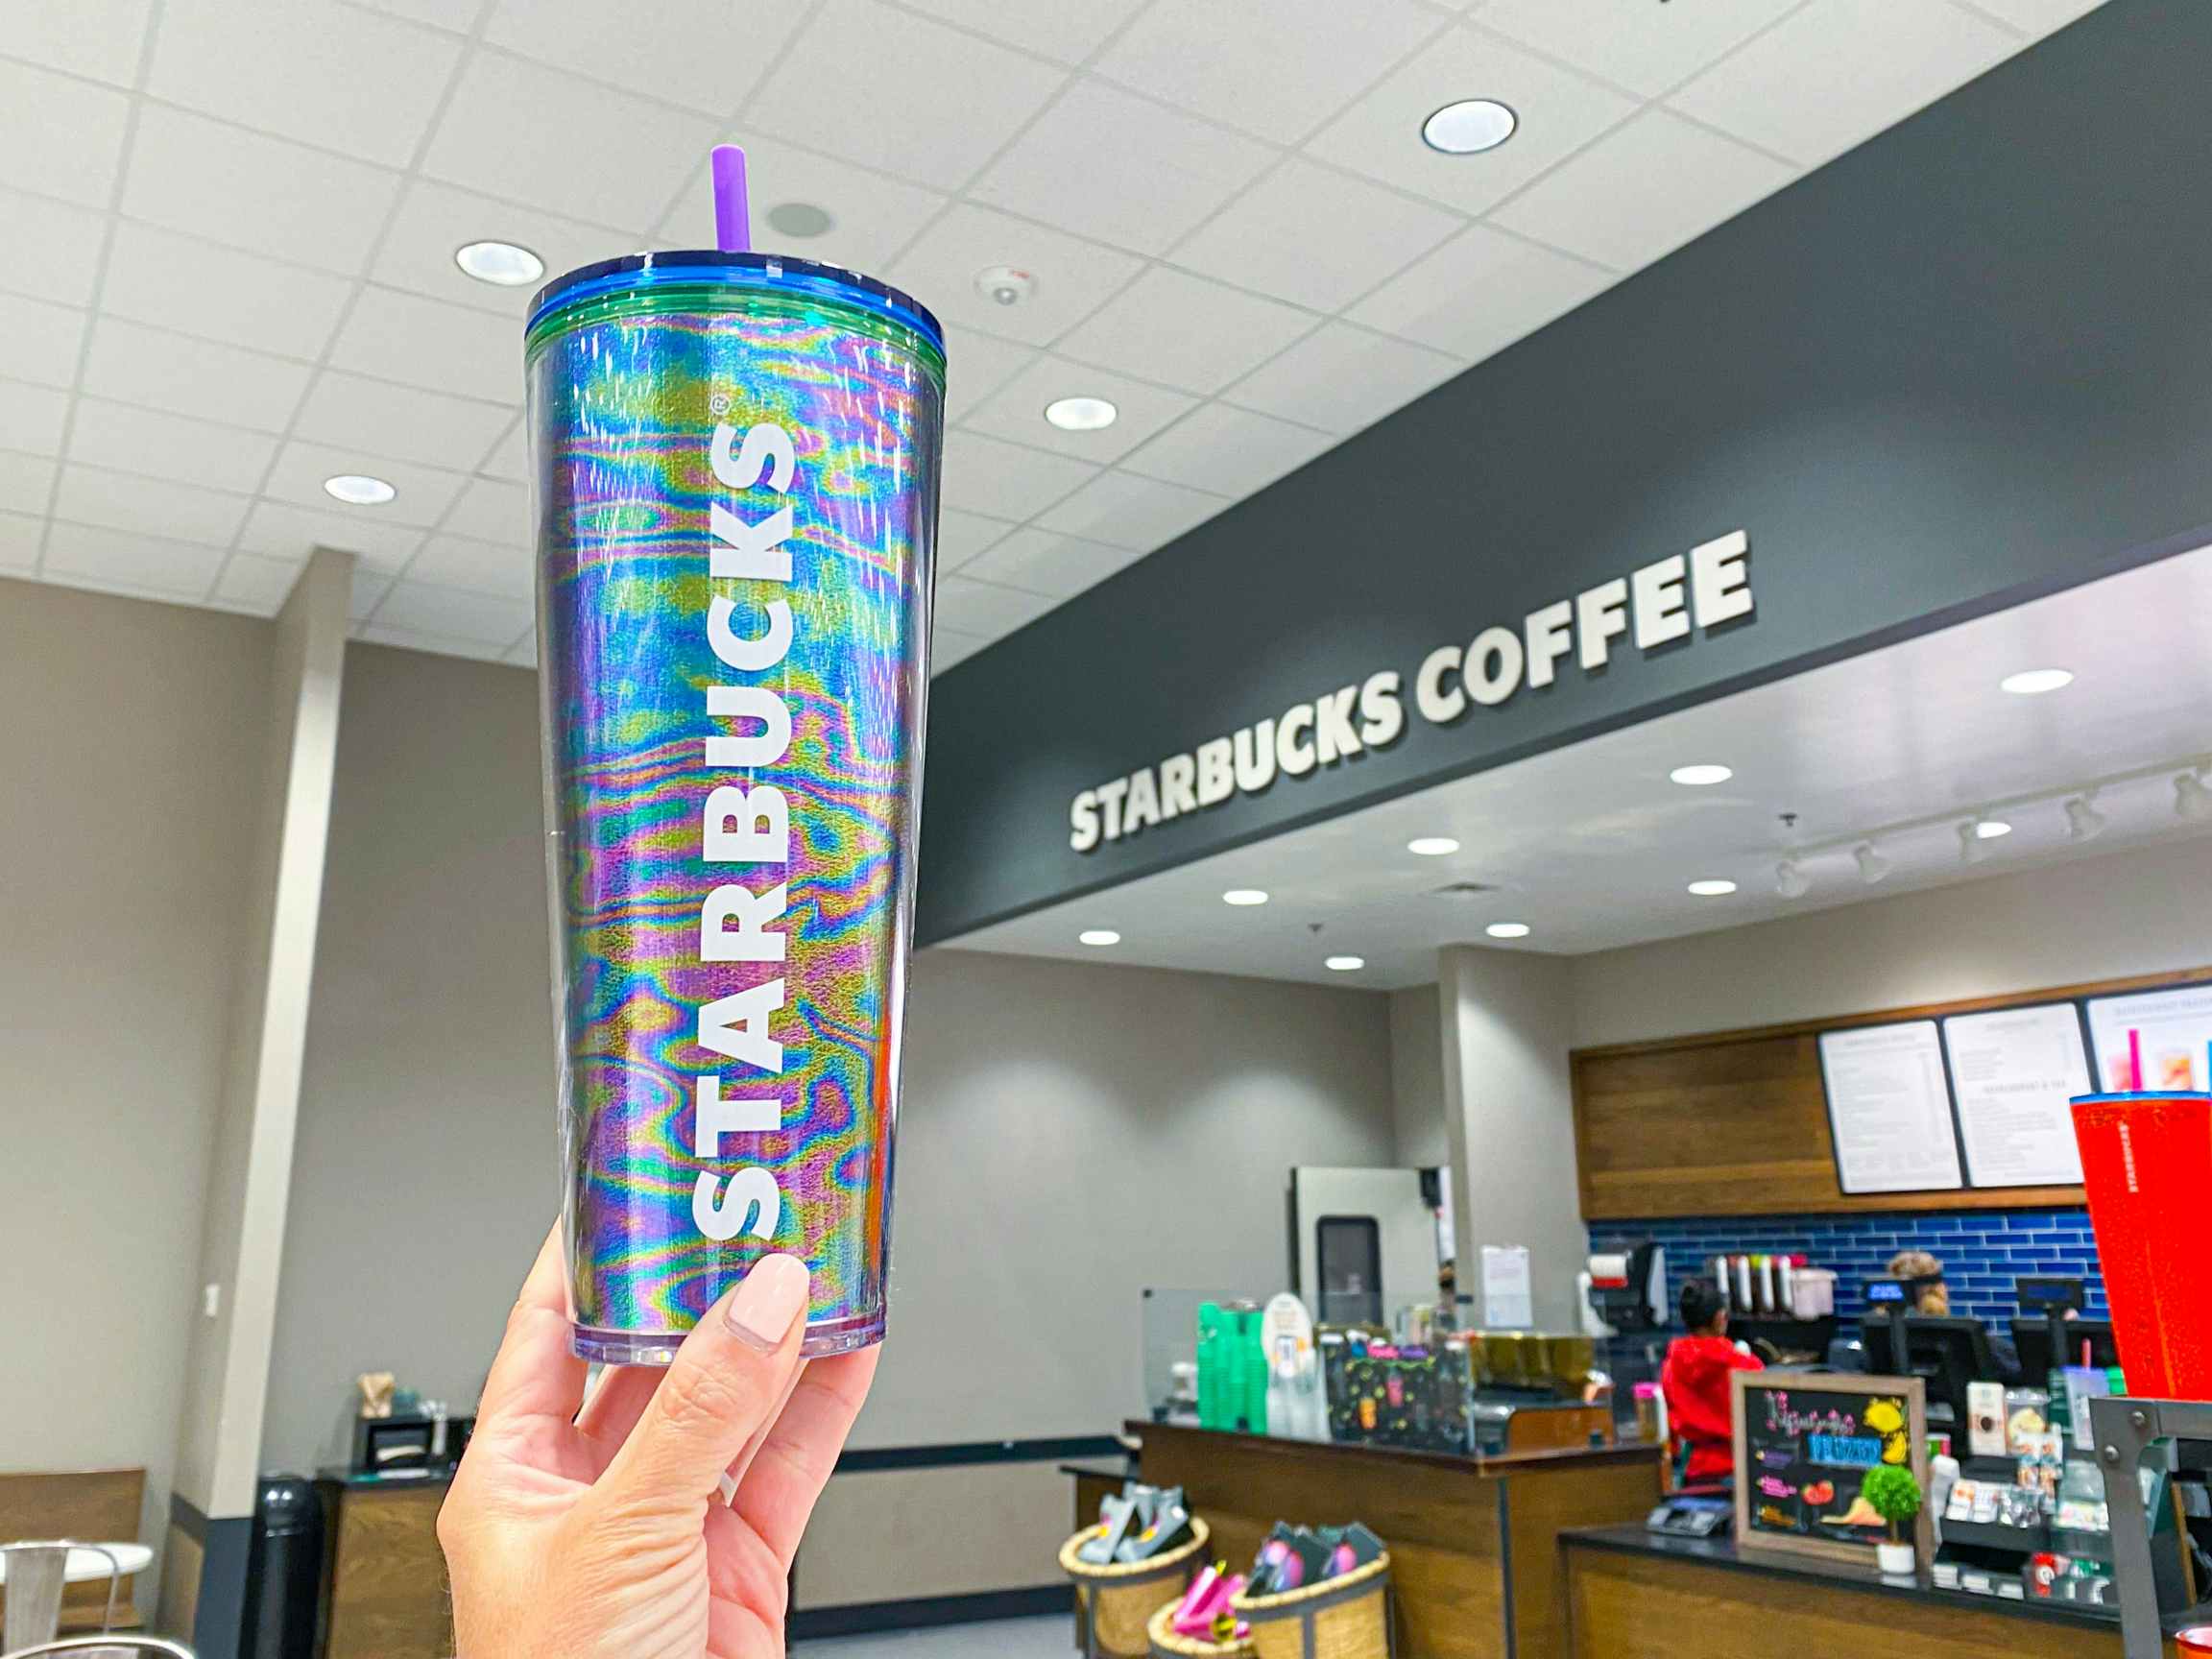 Starbucks' Stanley Cup at Target: New Photos and Restock Details